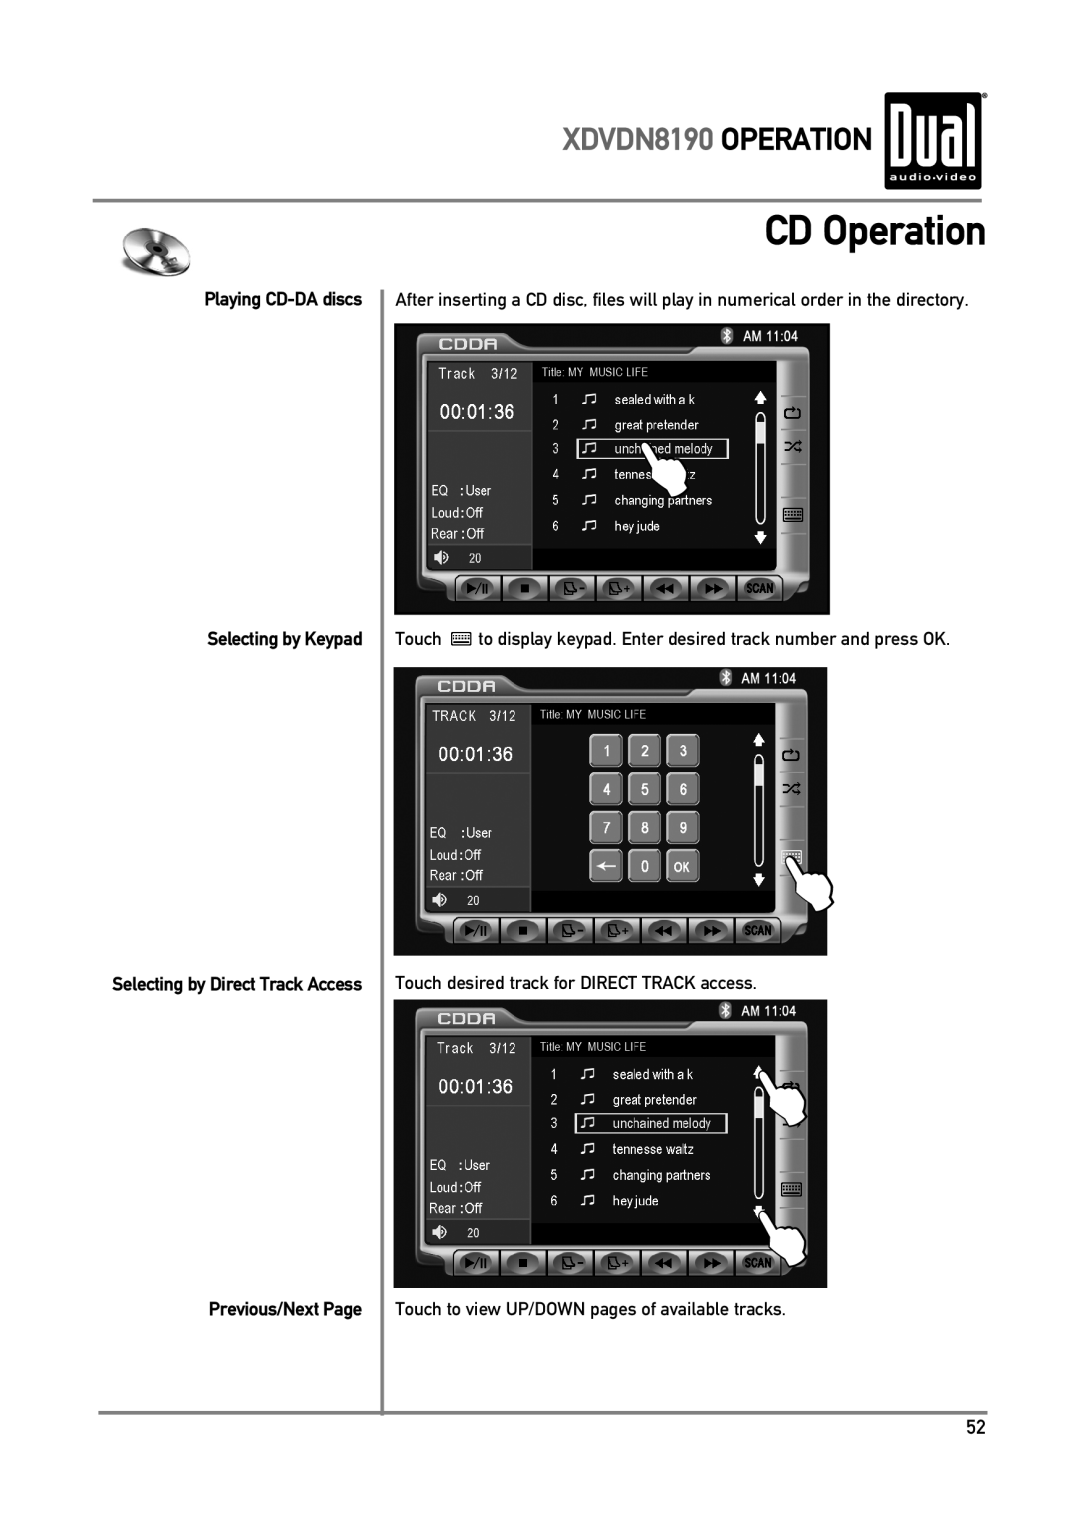 Dual owner manual CD Operation, XDVDN8190 OPERATION, Playing CD-DAdiscs Selecting by Keypad, Previous/Next Page 